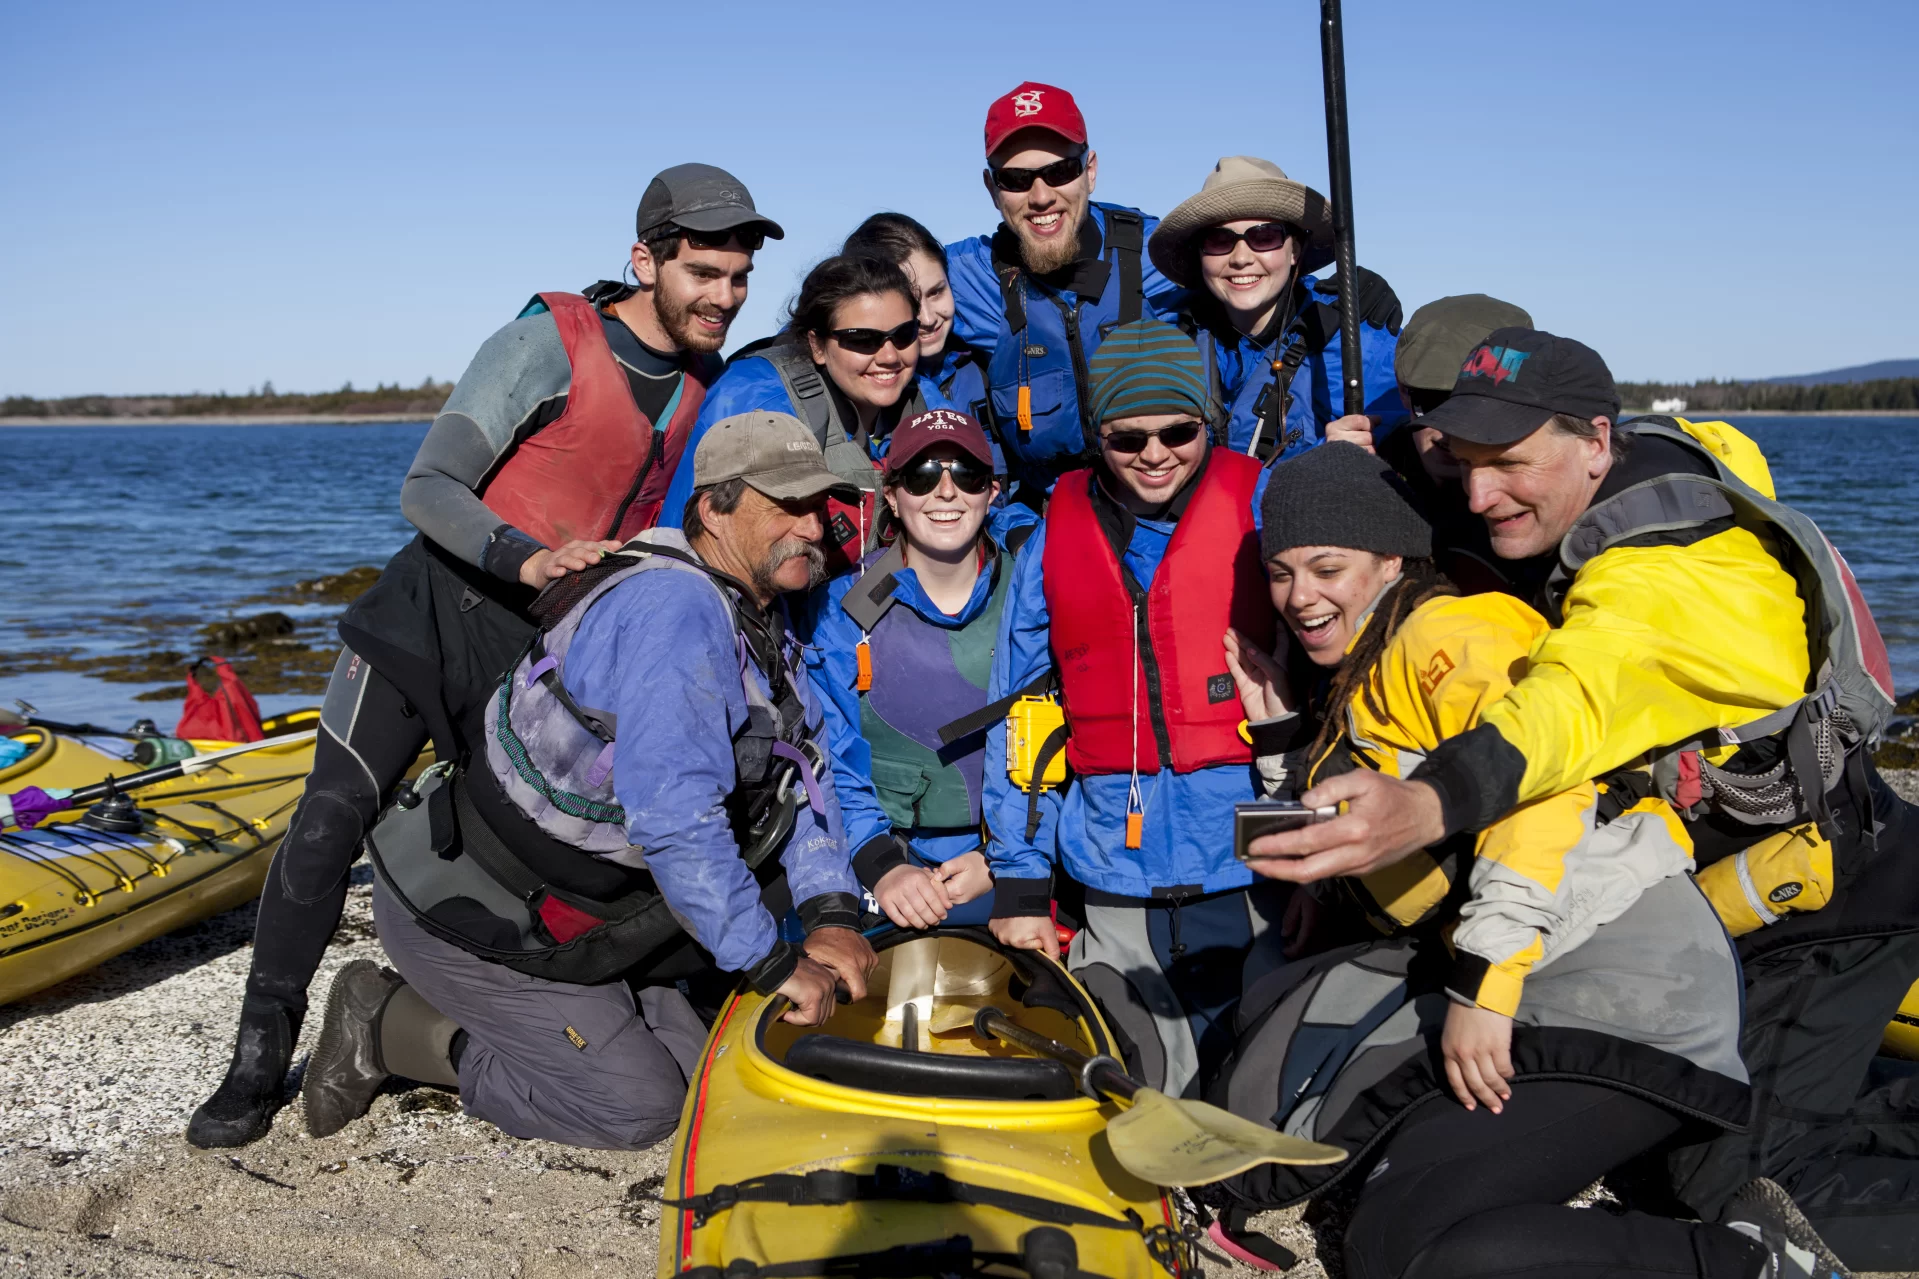 Dyk Eusden's Geology of the Maine Coast by Sea Kayak class takes a "selfie" on Little Cranberry Island before paddling to Great Cranberry Island to begin geology work.(Sarah Crosby/Bates College)